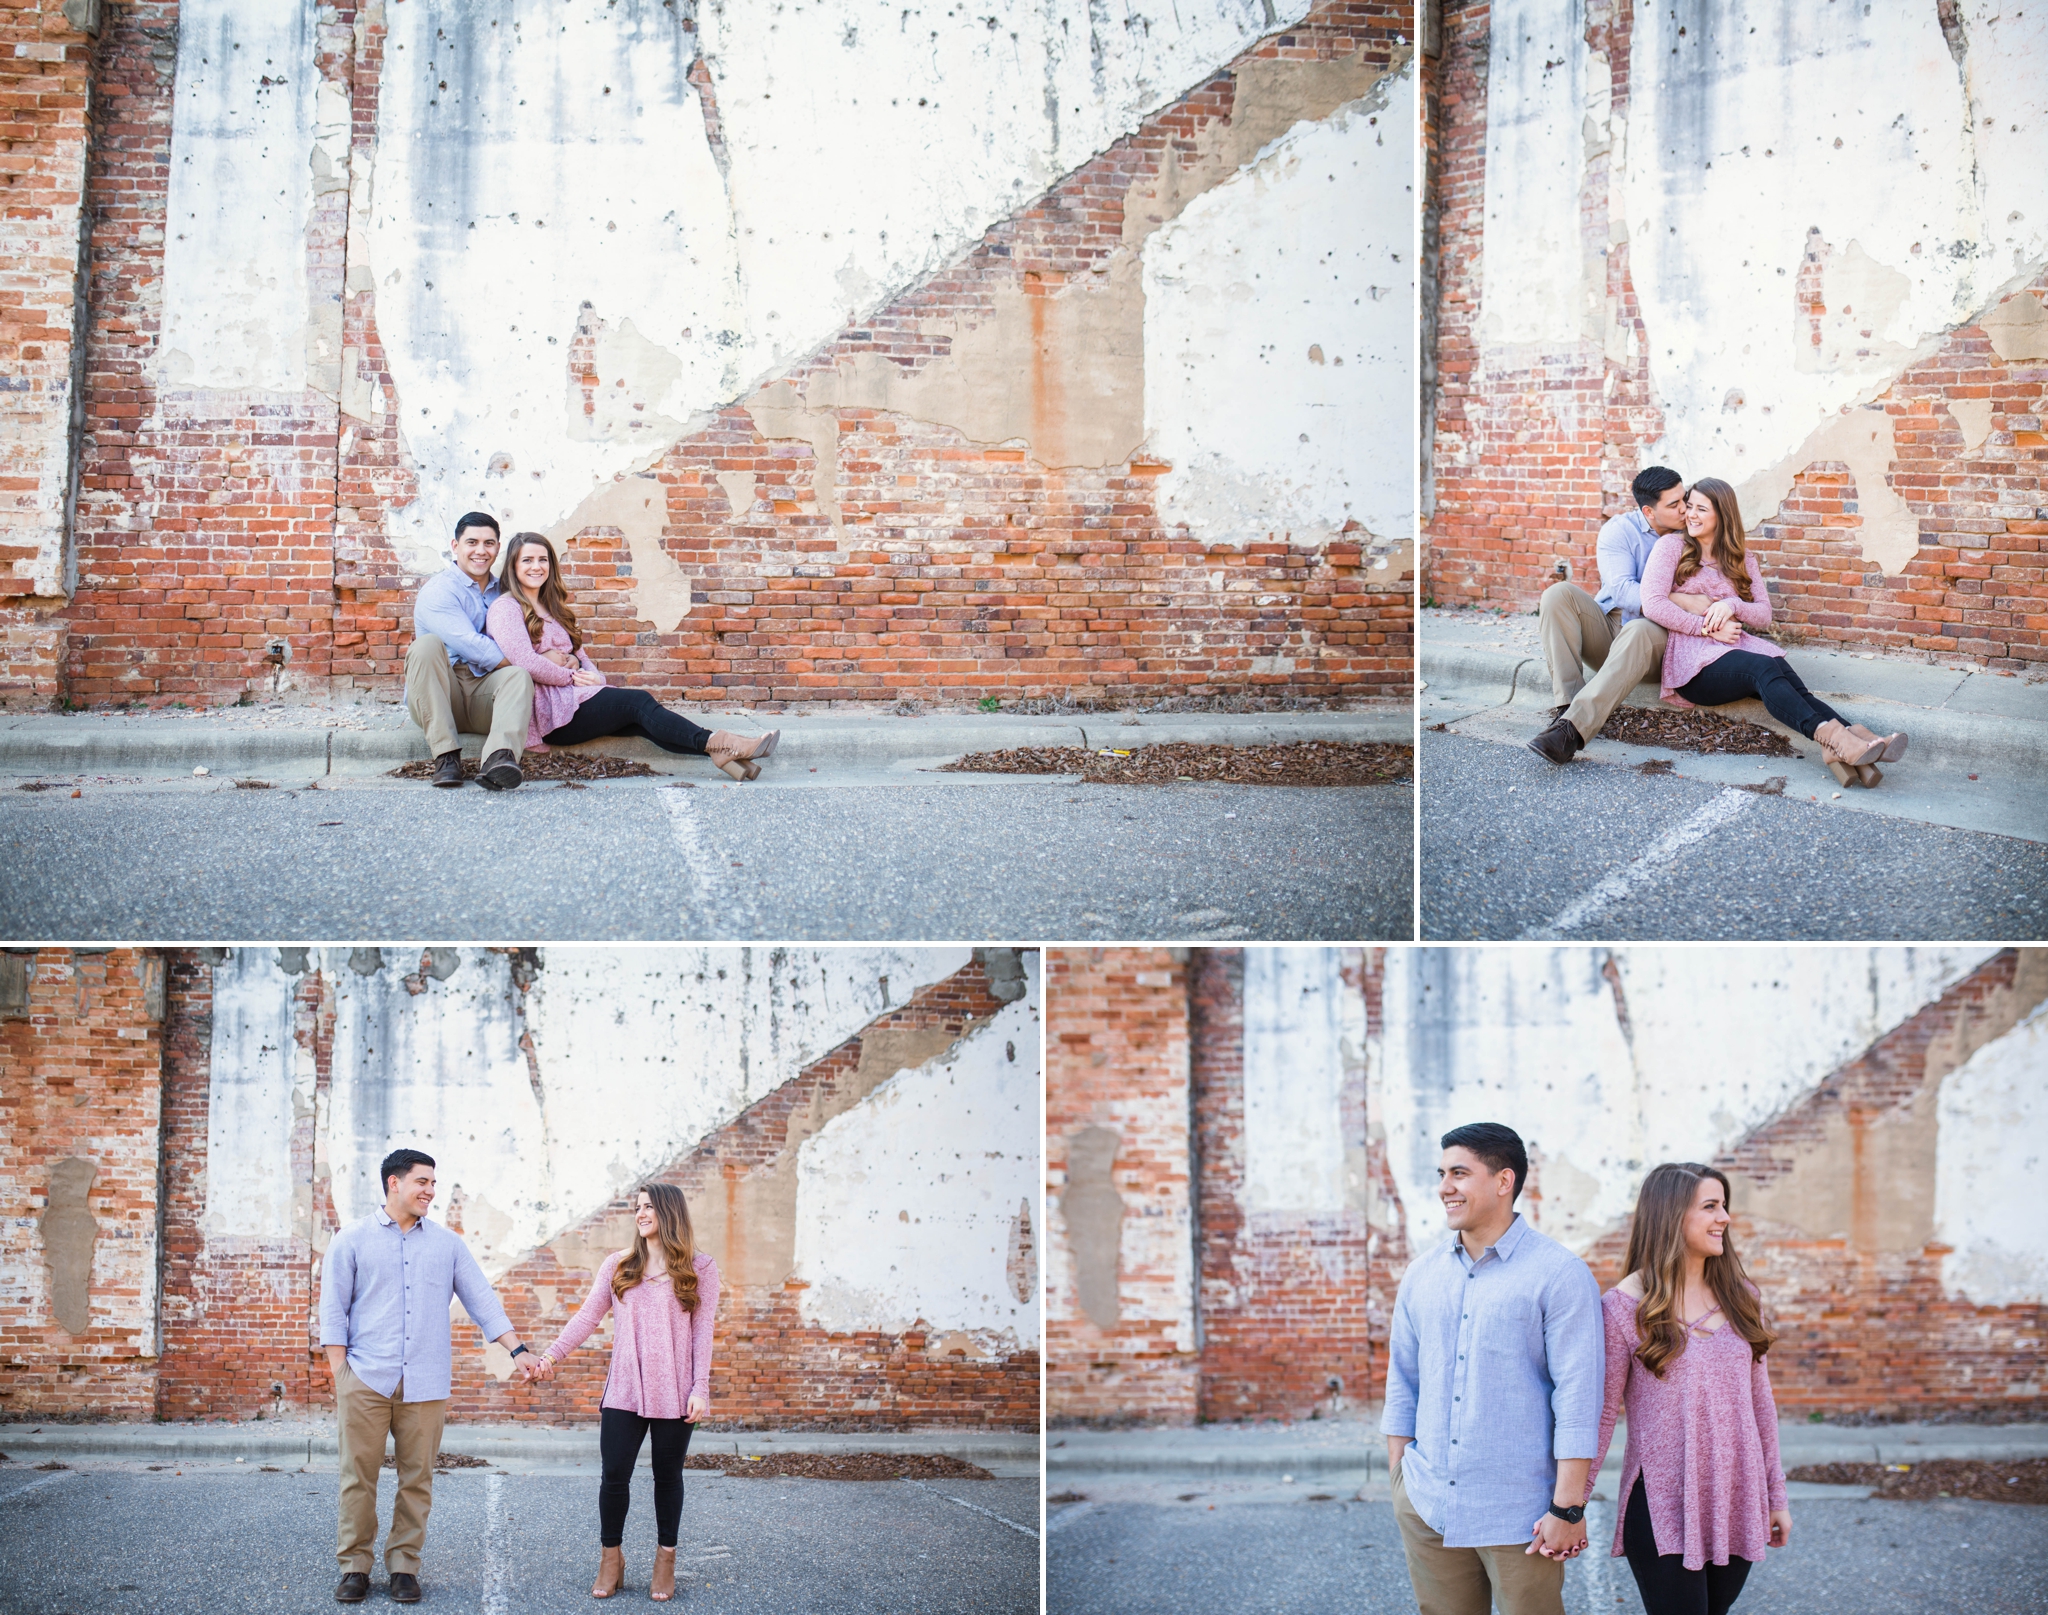 Jessica + Brandon - Engagement Photography in Downtown Fayetteville North Carolina